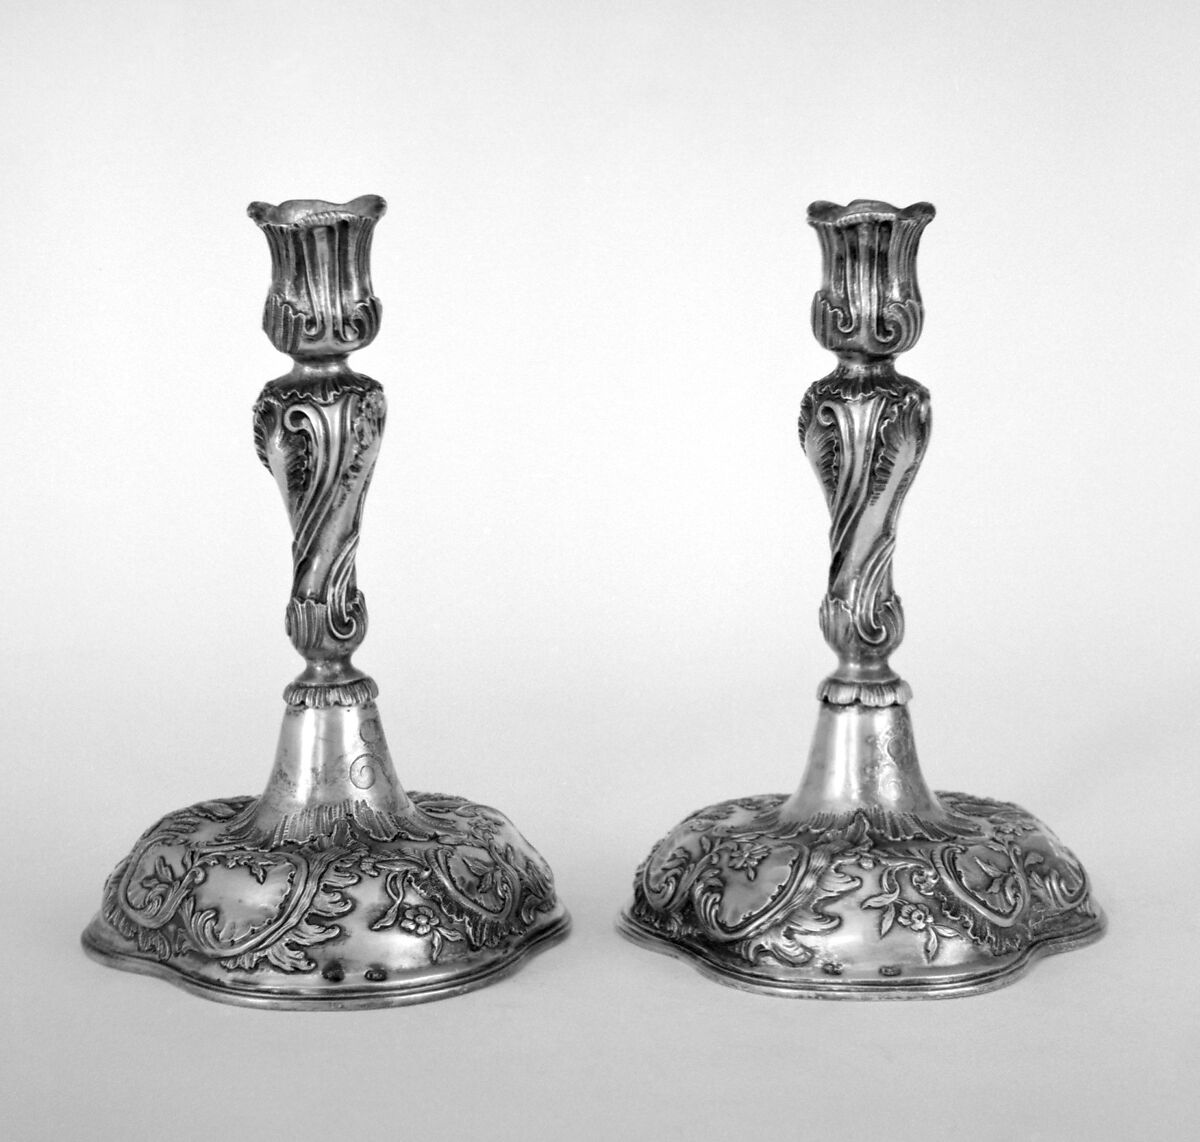 Candlestick (one of a pair), Possibly by Johann Martin Satzger I (ca. 1707–1785, master 1737), Silver gilt, German, Augsburg 